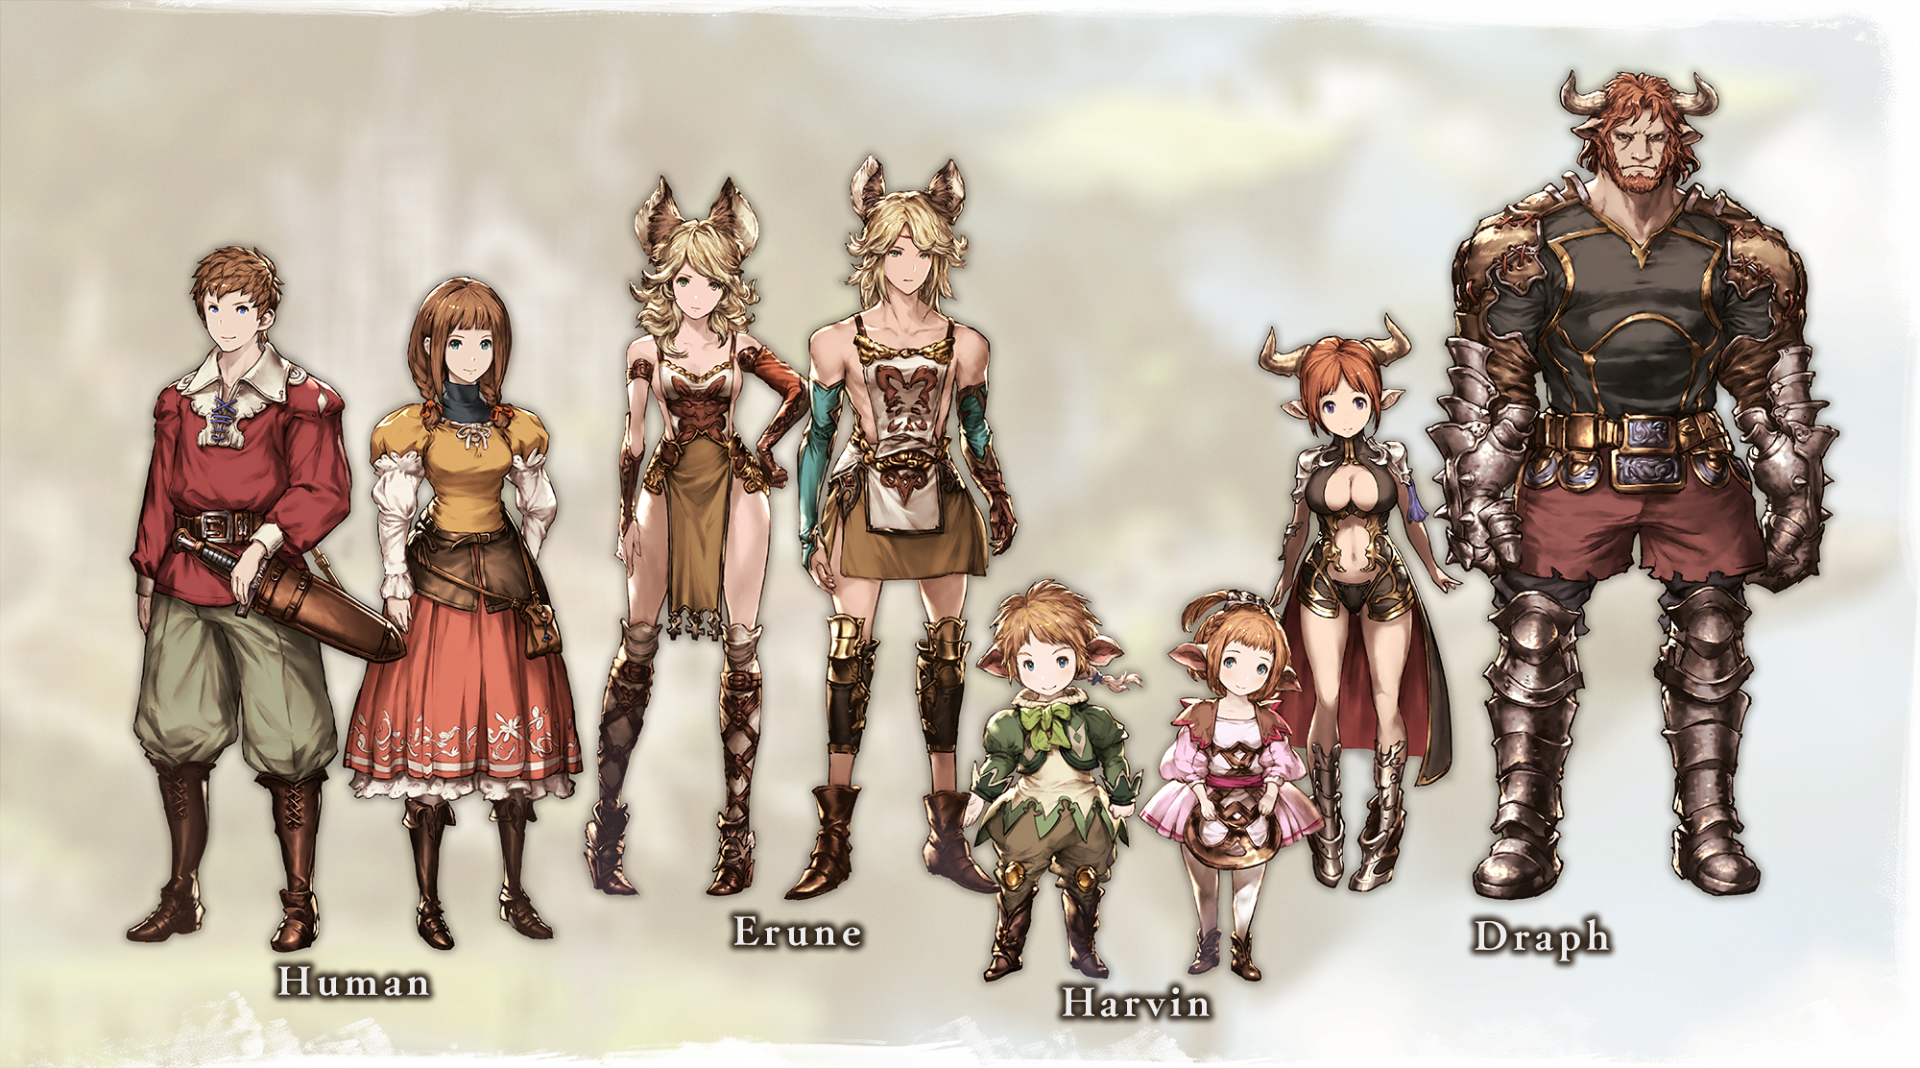 Illustration of character races from Granblue Fantasy: Relink video game, highlighting Humans, Erune, Draph, and Harvin.